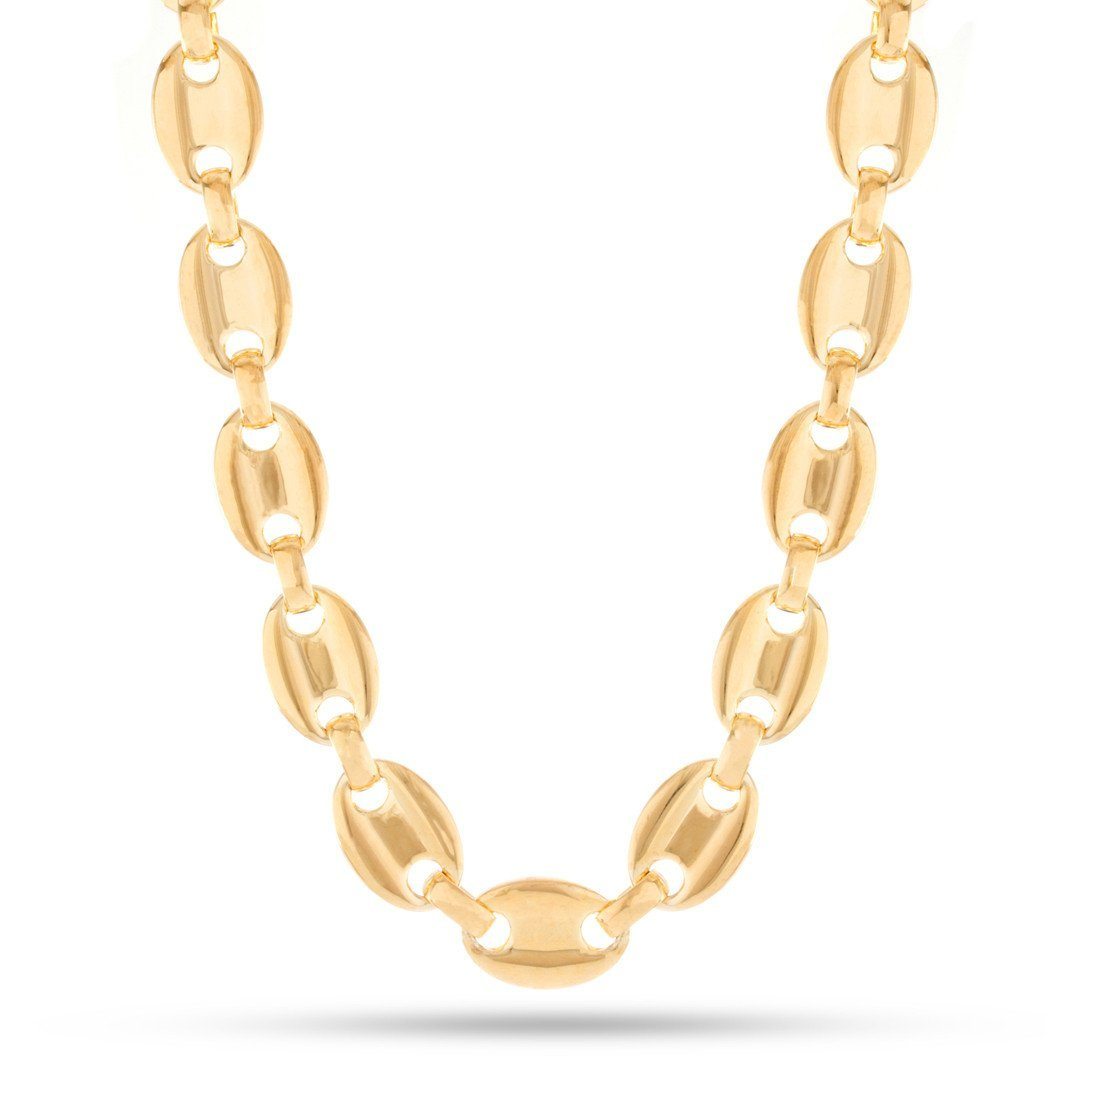 16mm, 14K Gold Stainless Steel G-Link Chain